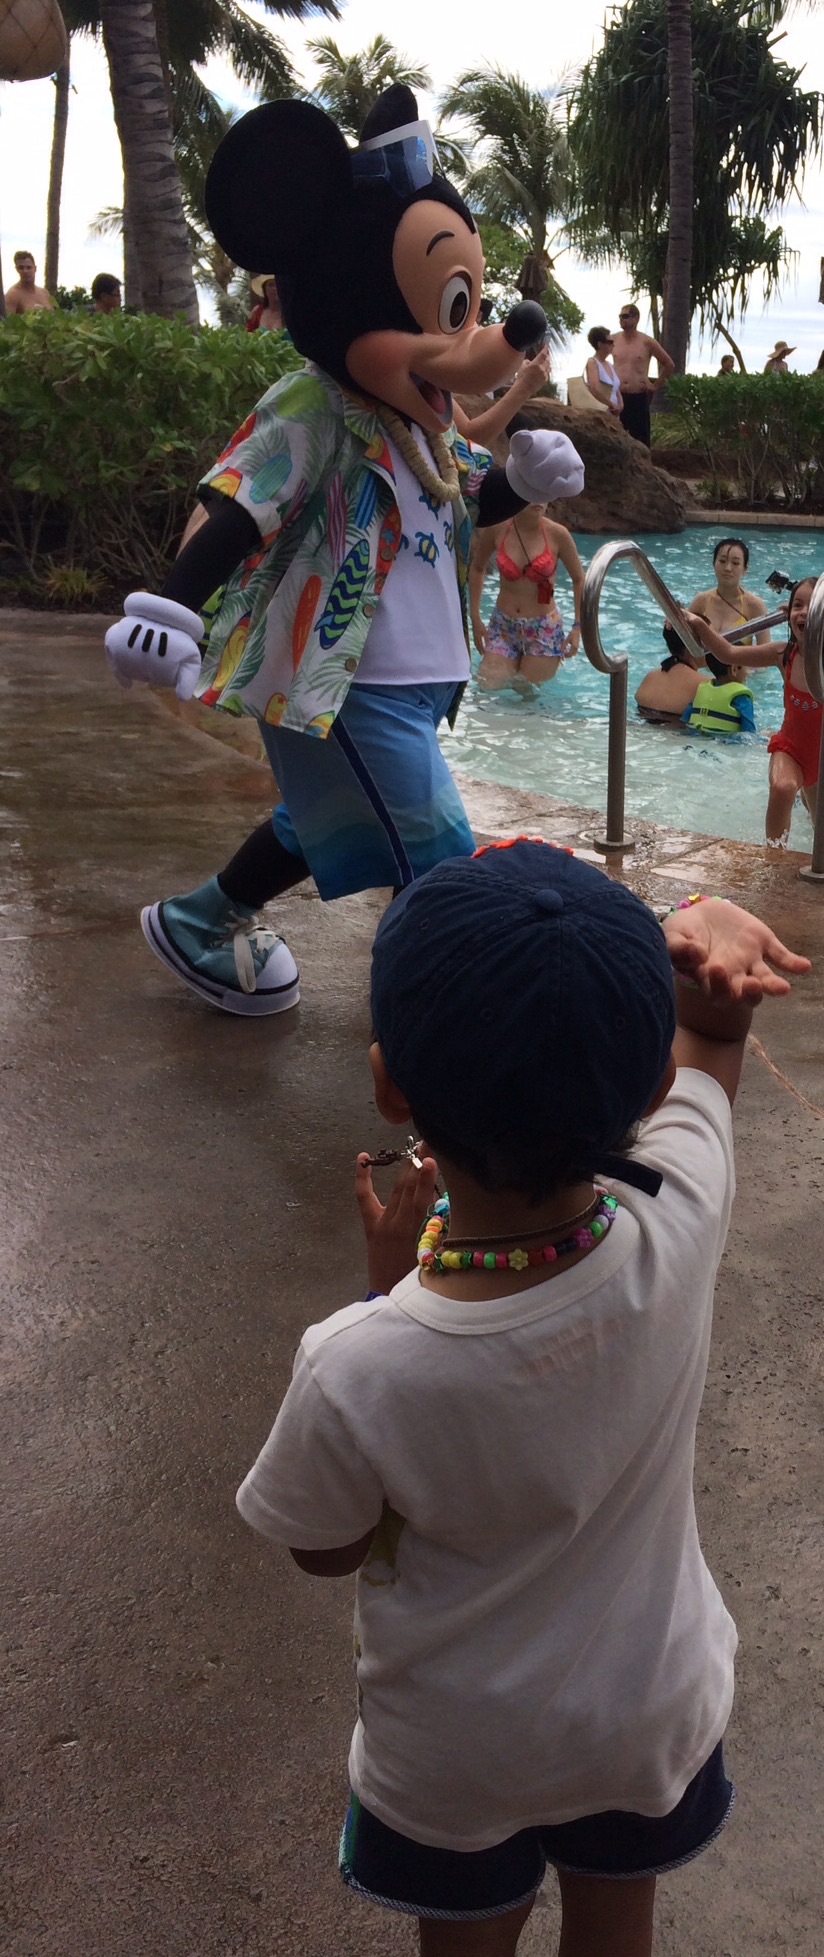 Meeting Mickey Mouse at Aulani in Hawaii with kids